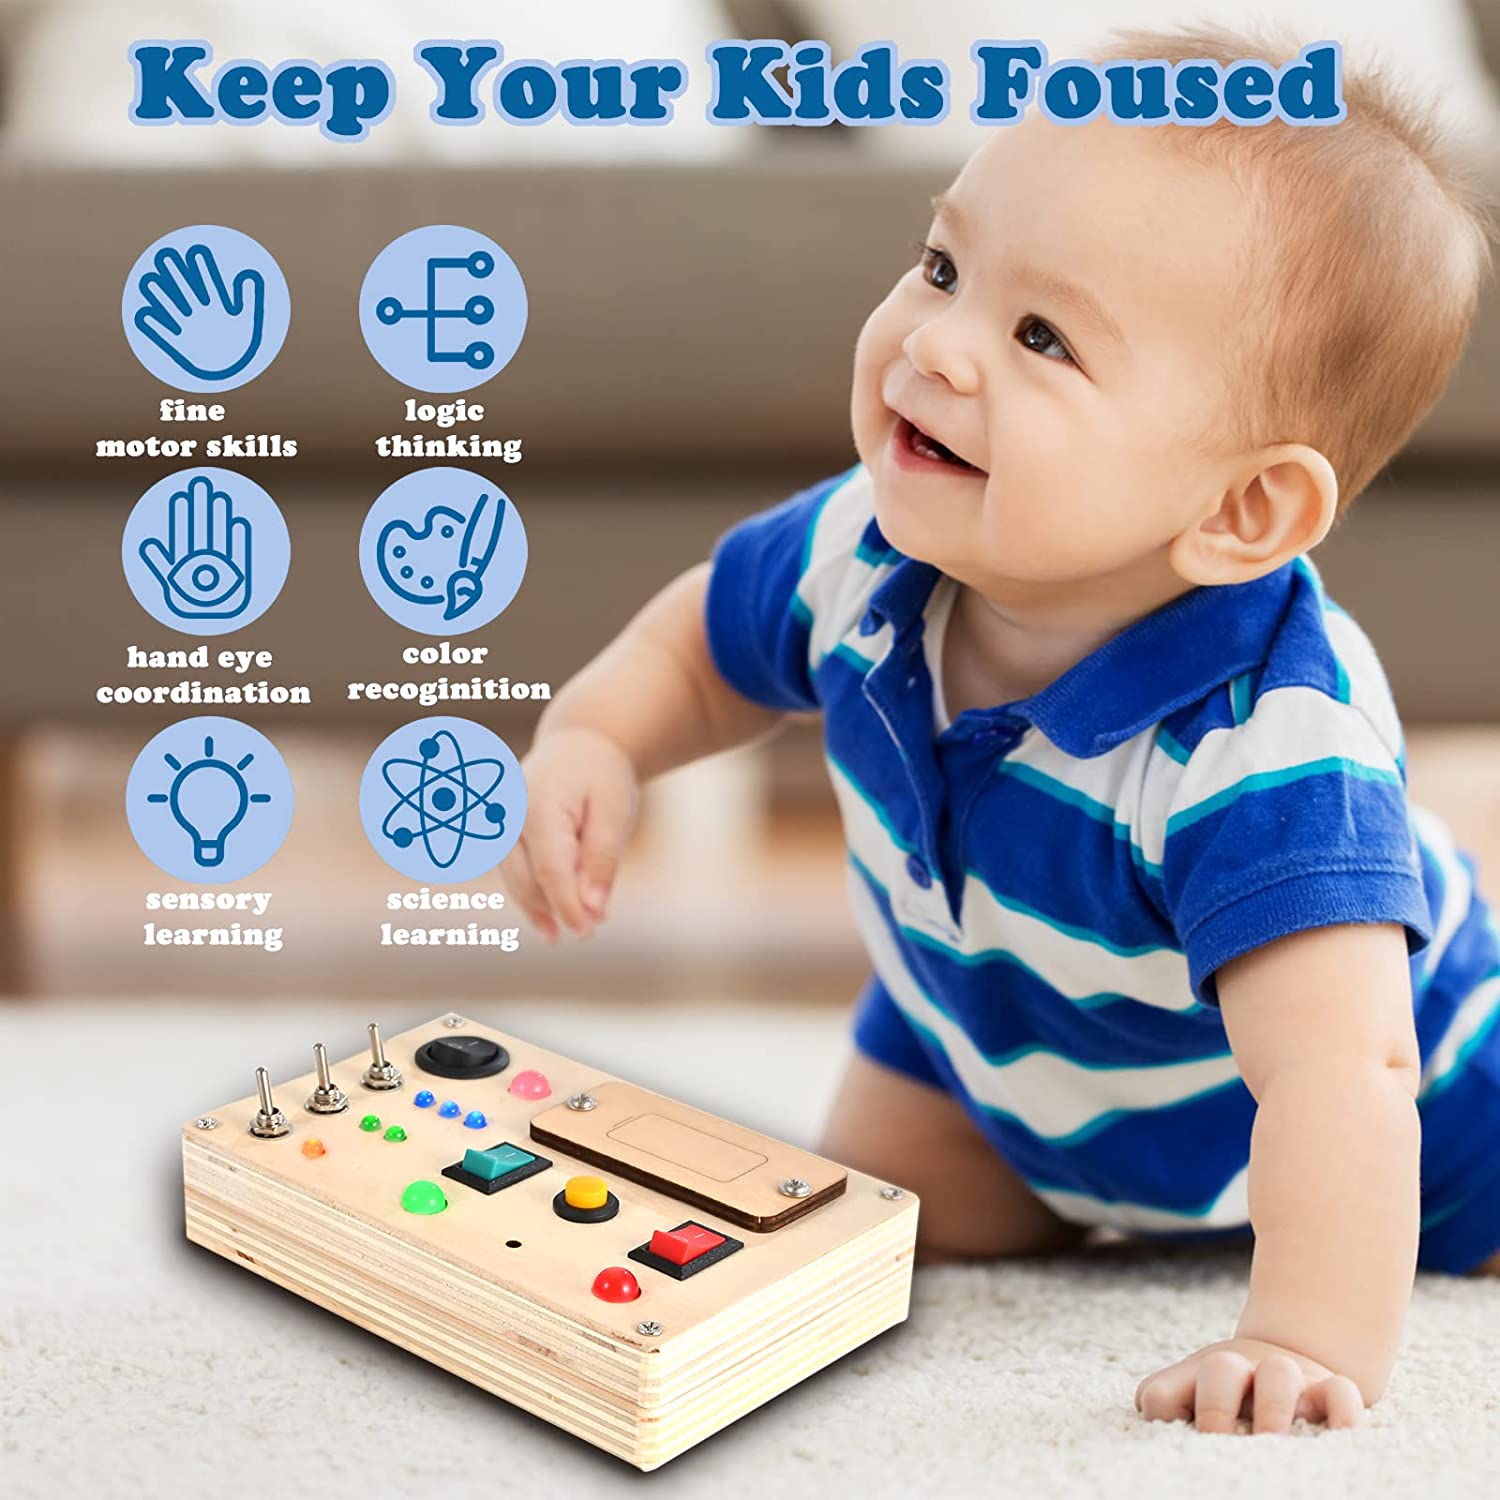 LED Light Switch Busy Board Toy Button Busy Board Kids Wooden Control Panel Kids Toy Activity Sensory Board Fidget Toy for Toddlers 1 2 3 Year Old